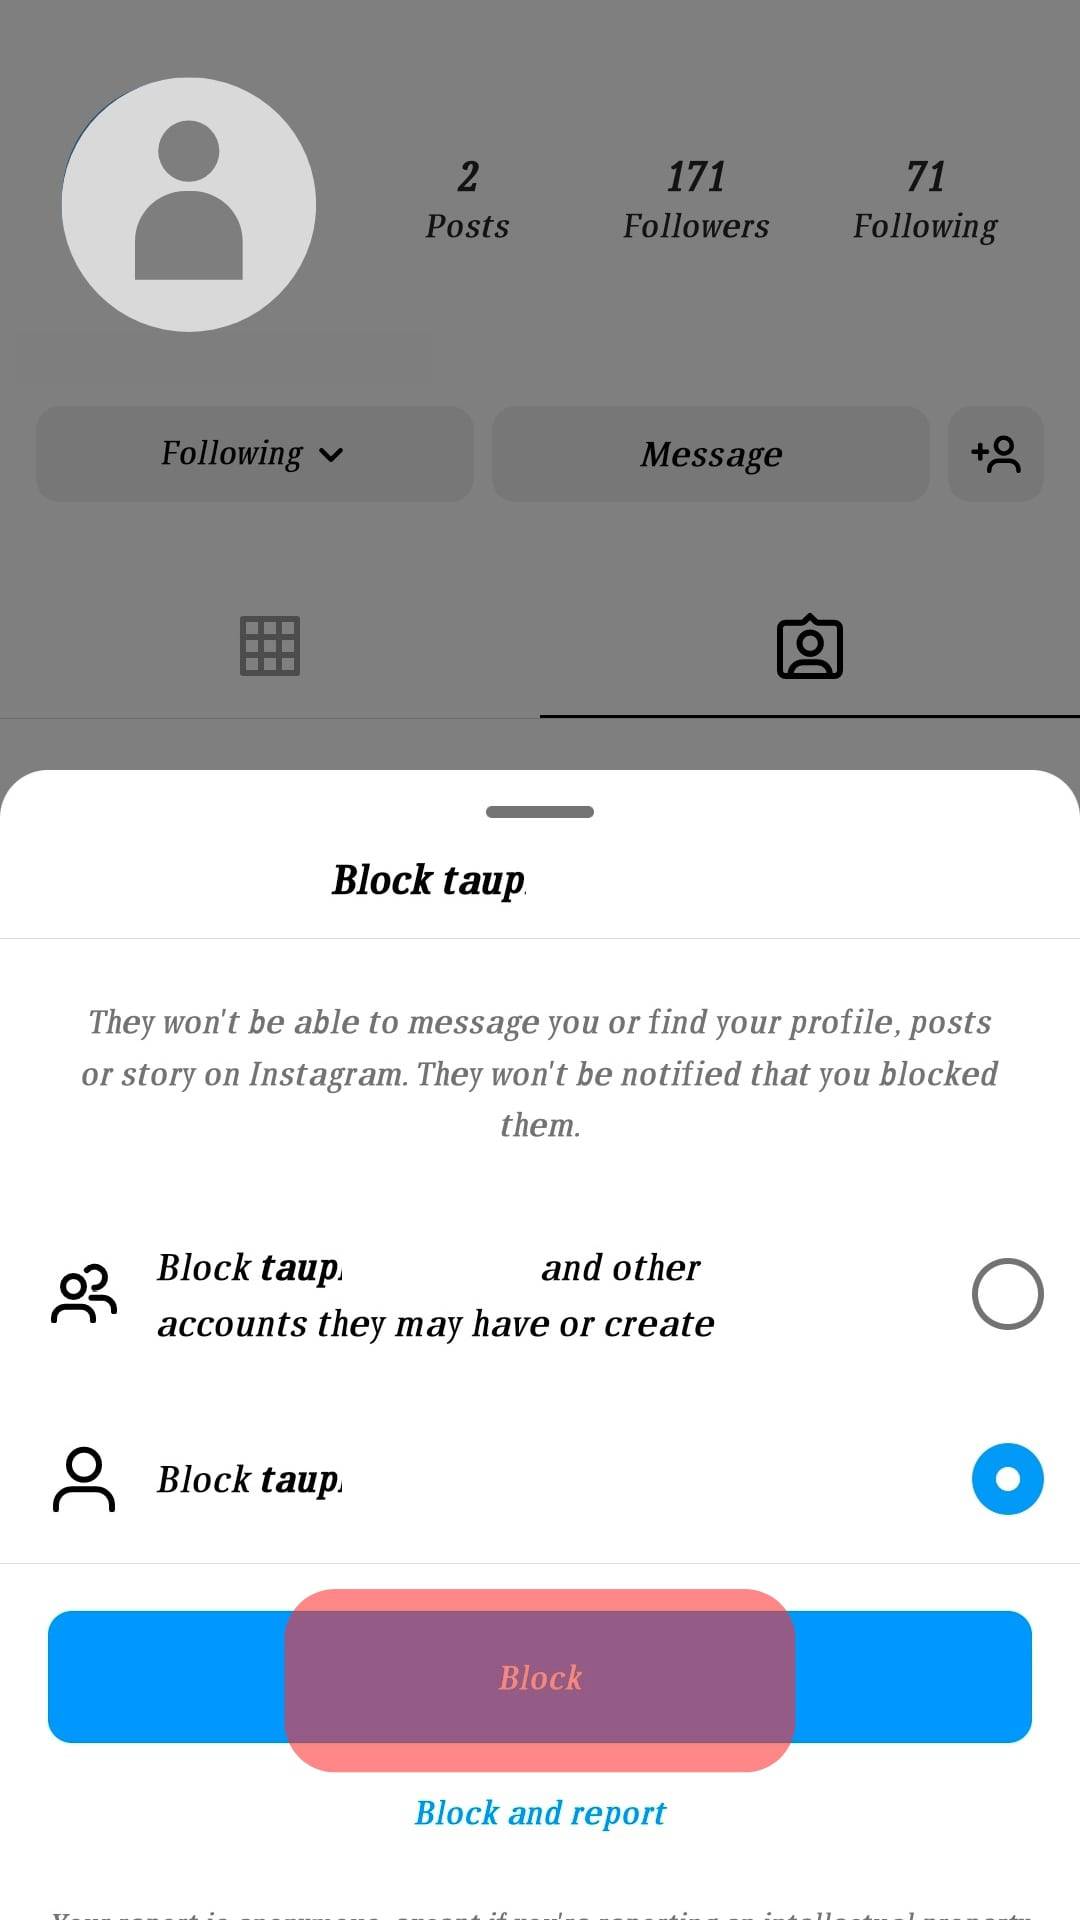 Confirm By Clicking The Block Button Again